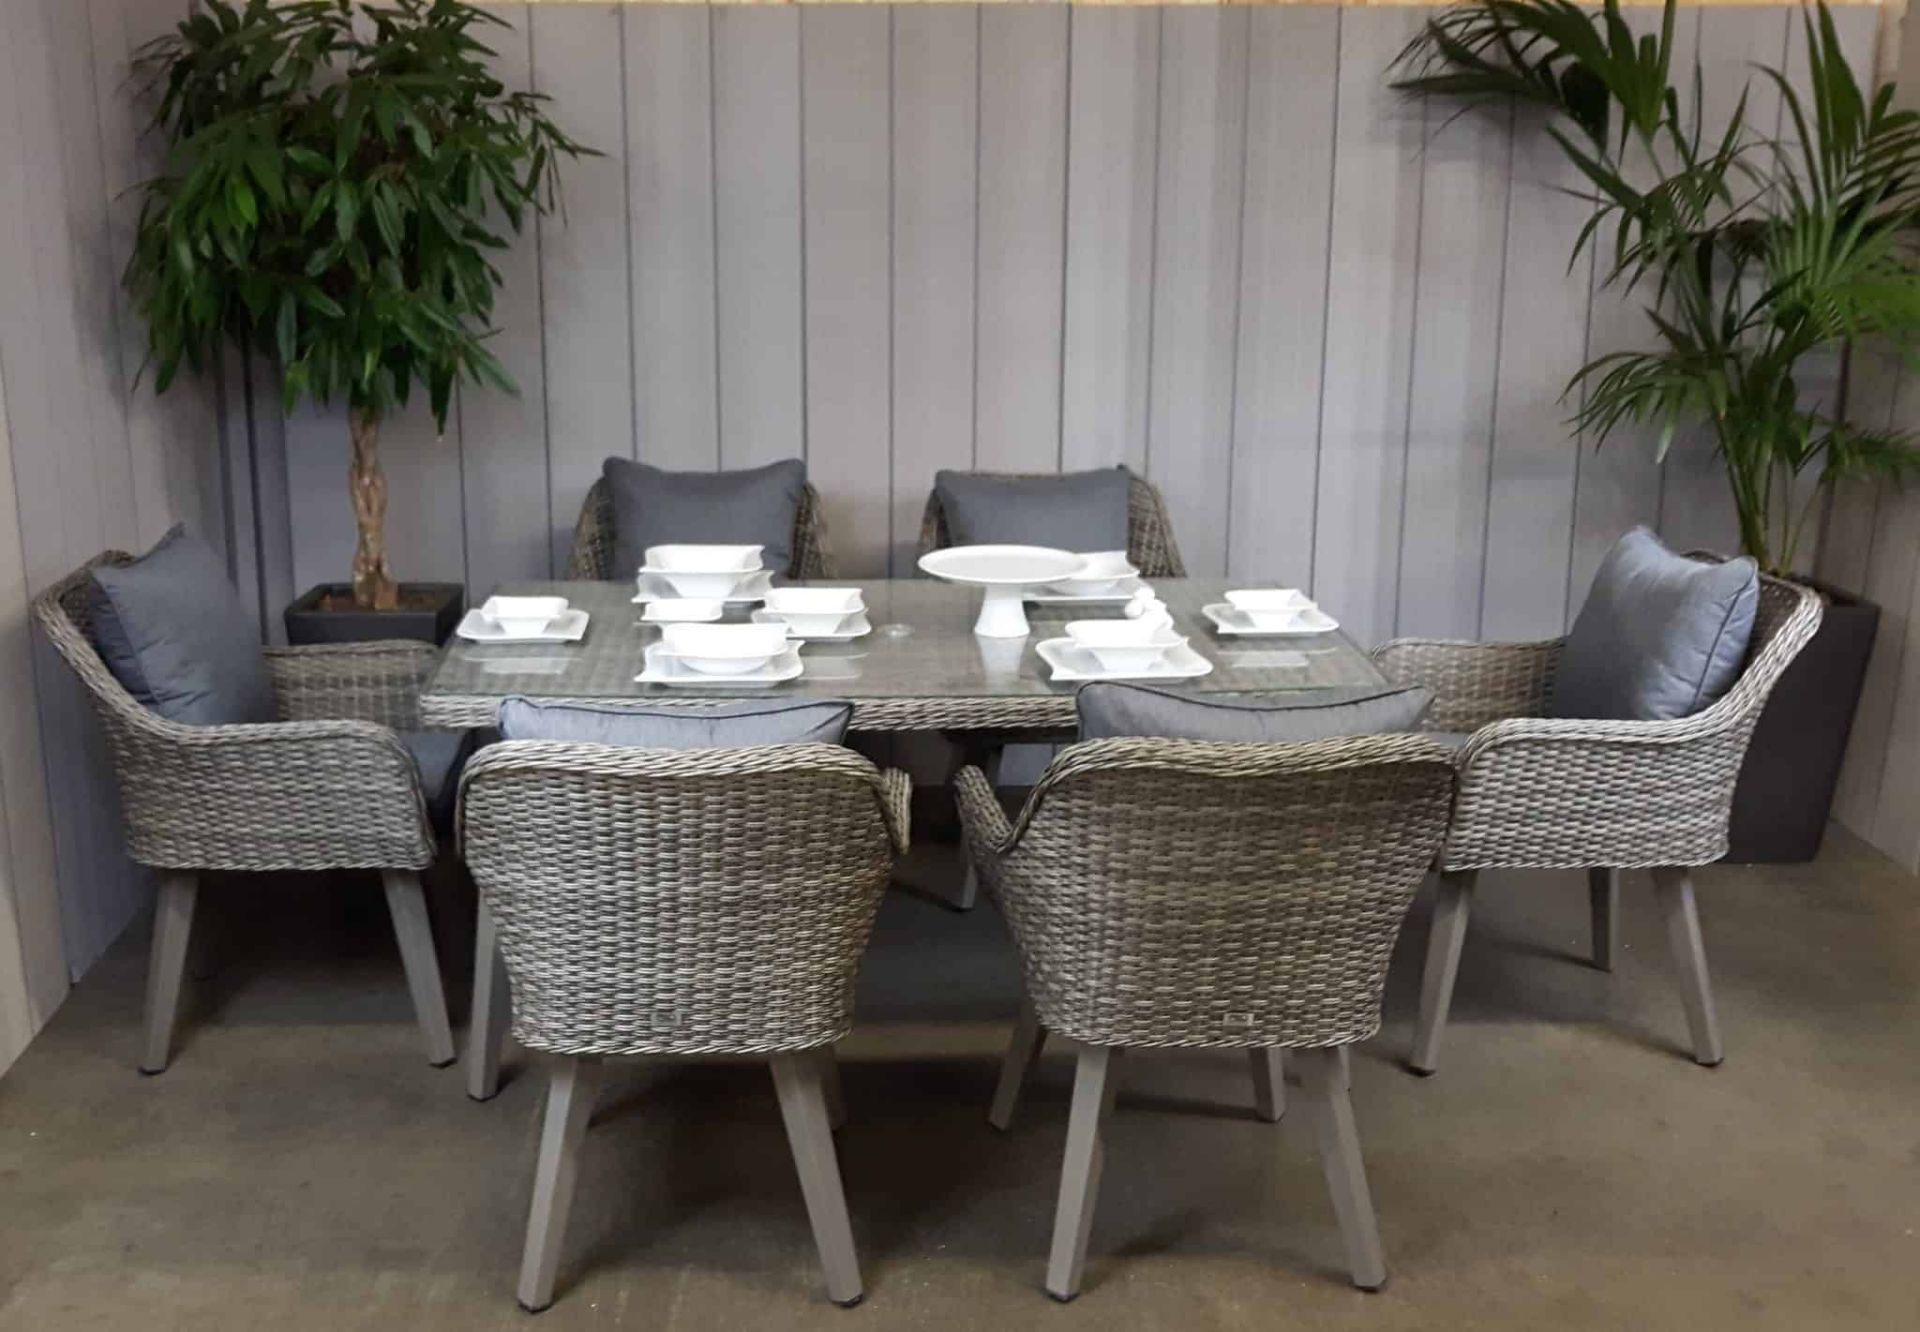 NEW 2019 Hardingham 7 Piece Contemporary All Weather Dining Set - Image 7 of 7